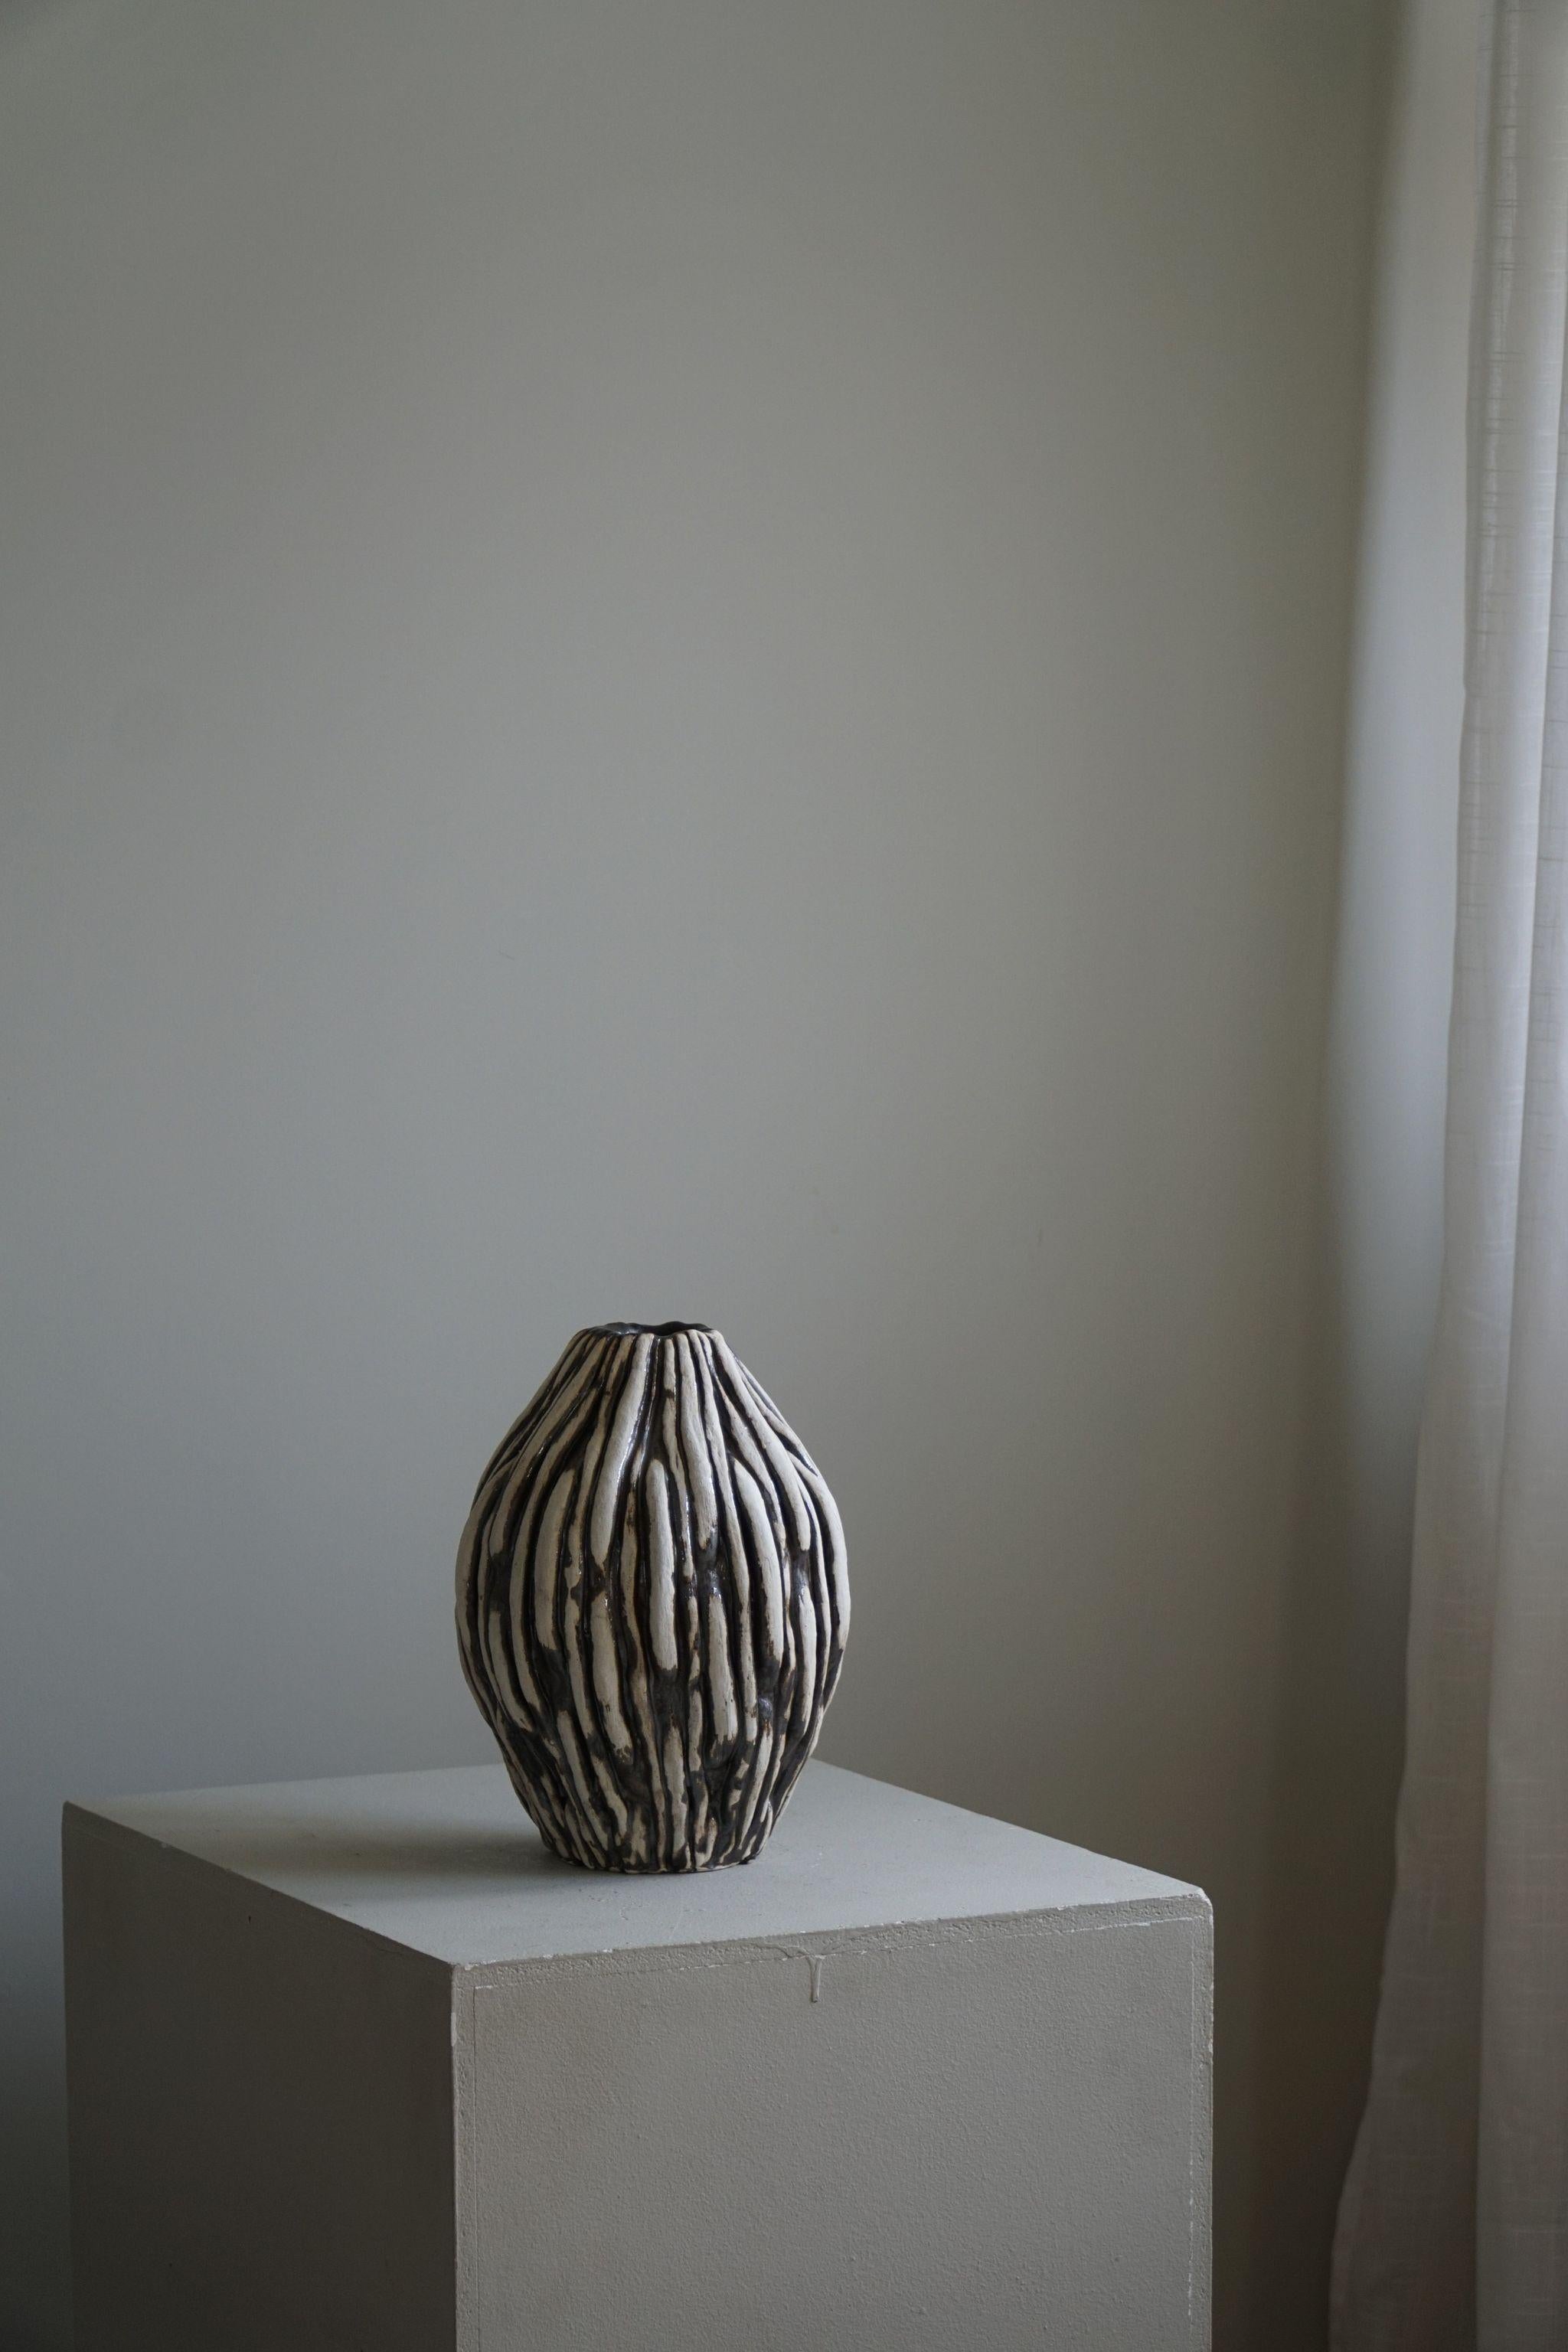 Large ceramic vase with glaze in variations of white, beige and bronze colors, made by Danish artist Ole Victor, 2024.

Ole Victor is a Danish artist who attended Art Academy between 1975 and 1980. He creates artworks and ceramics ever since. Hes